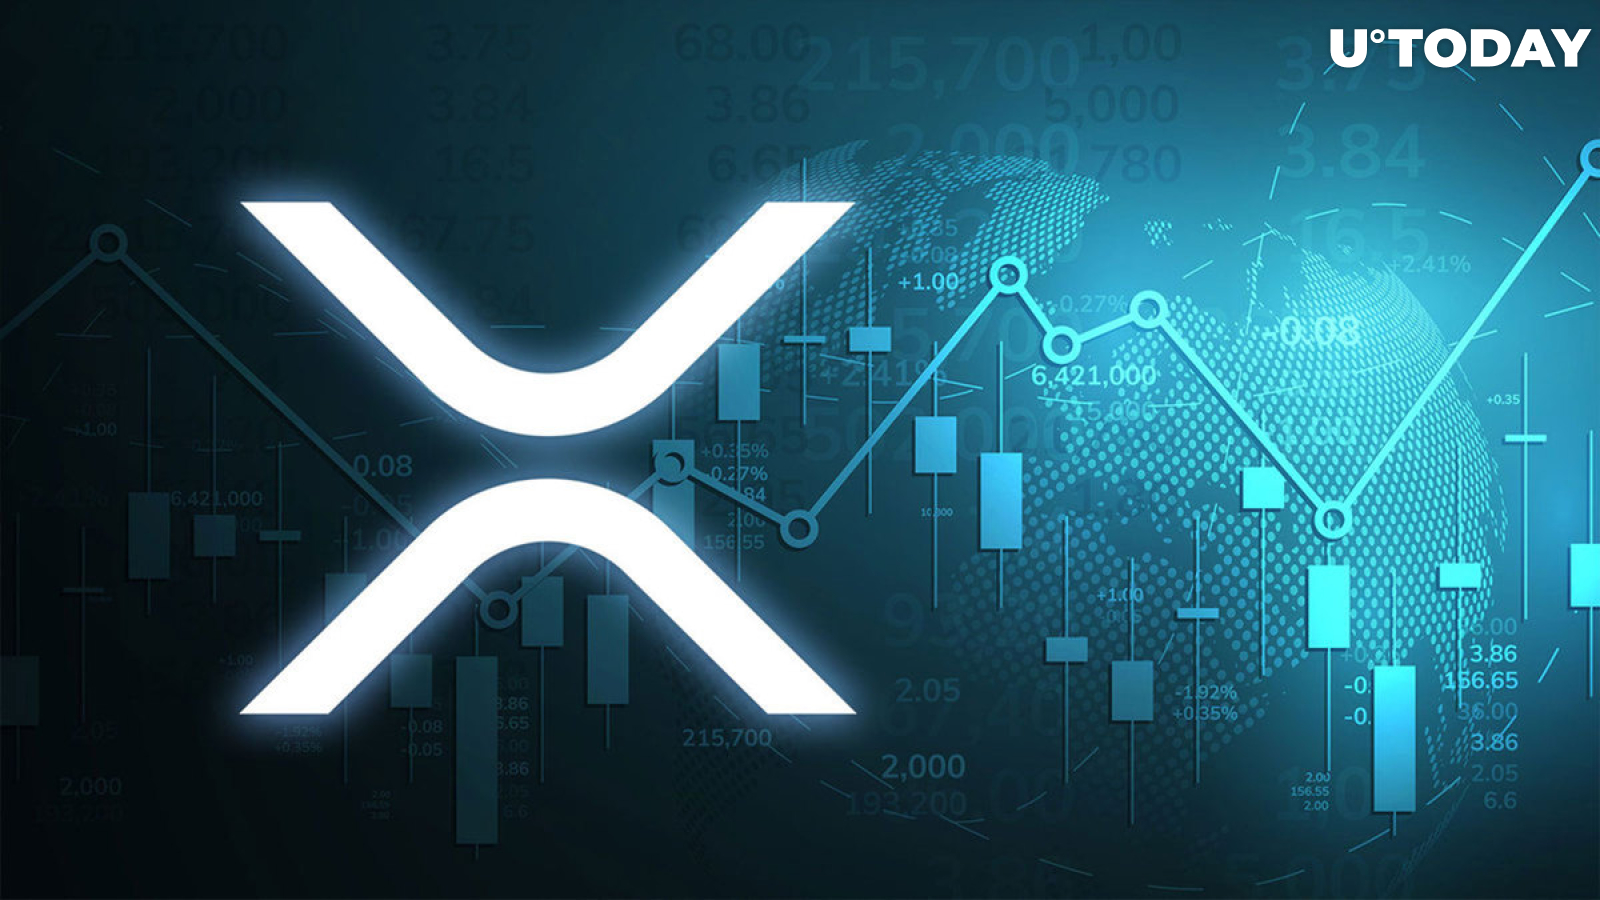 XRP up 11% WTD as It Sets Sights on New Milestone: Details